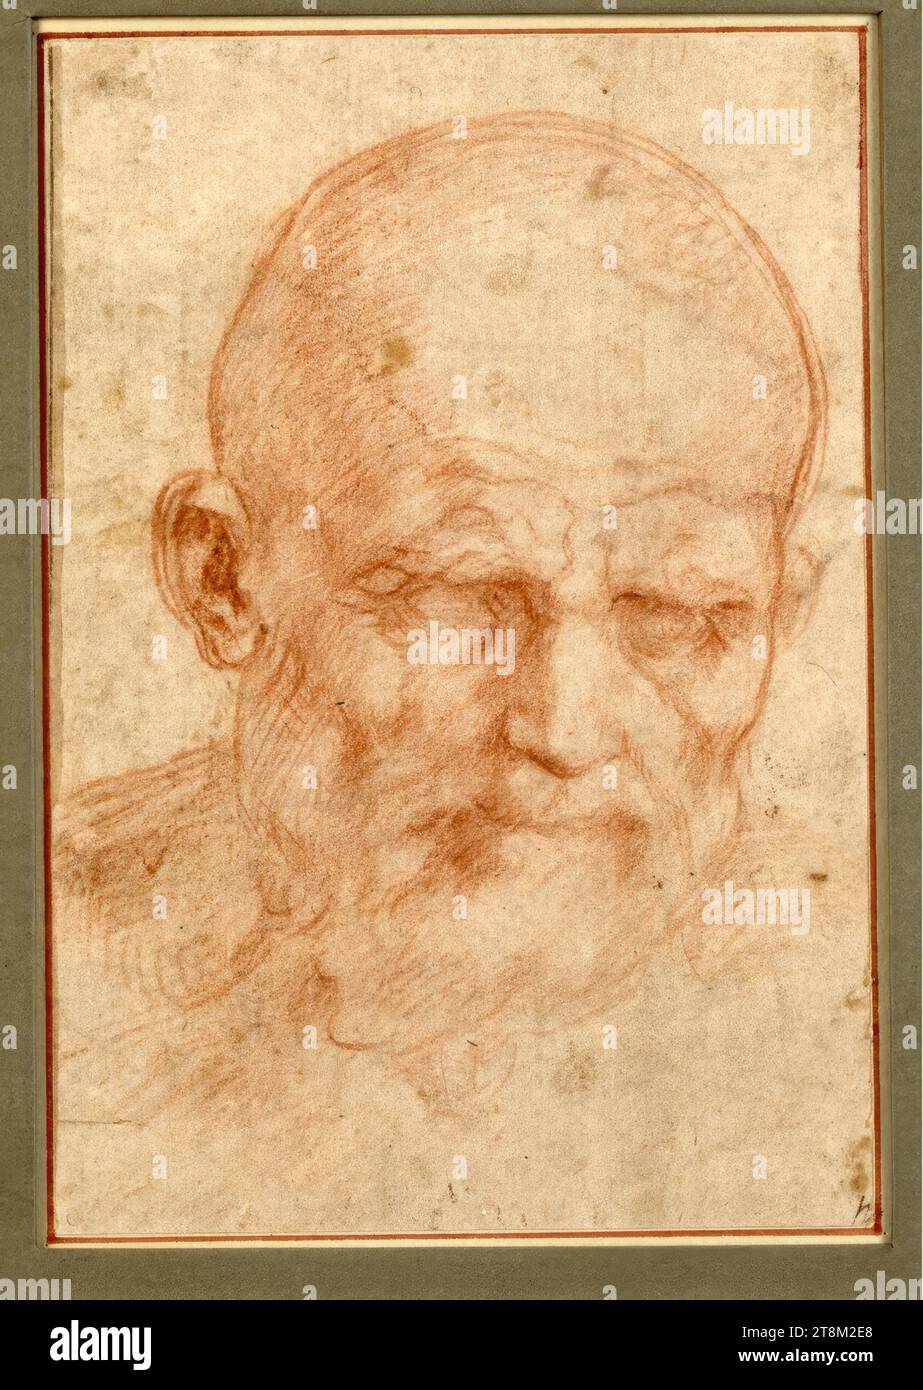 Head of a bald old man with a beard, Andrea del Sarto (Florence 1486 - 1530 Florence), around 1527-1529, drawing, red chalk, 19.3 x 13.2 cm, l.l. Duke Albert of Saxe-Teschen, r.r. in brown ink 'h Stock Photo